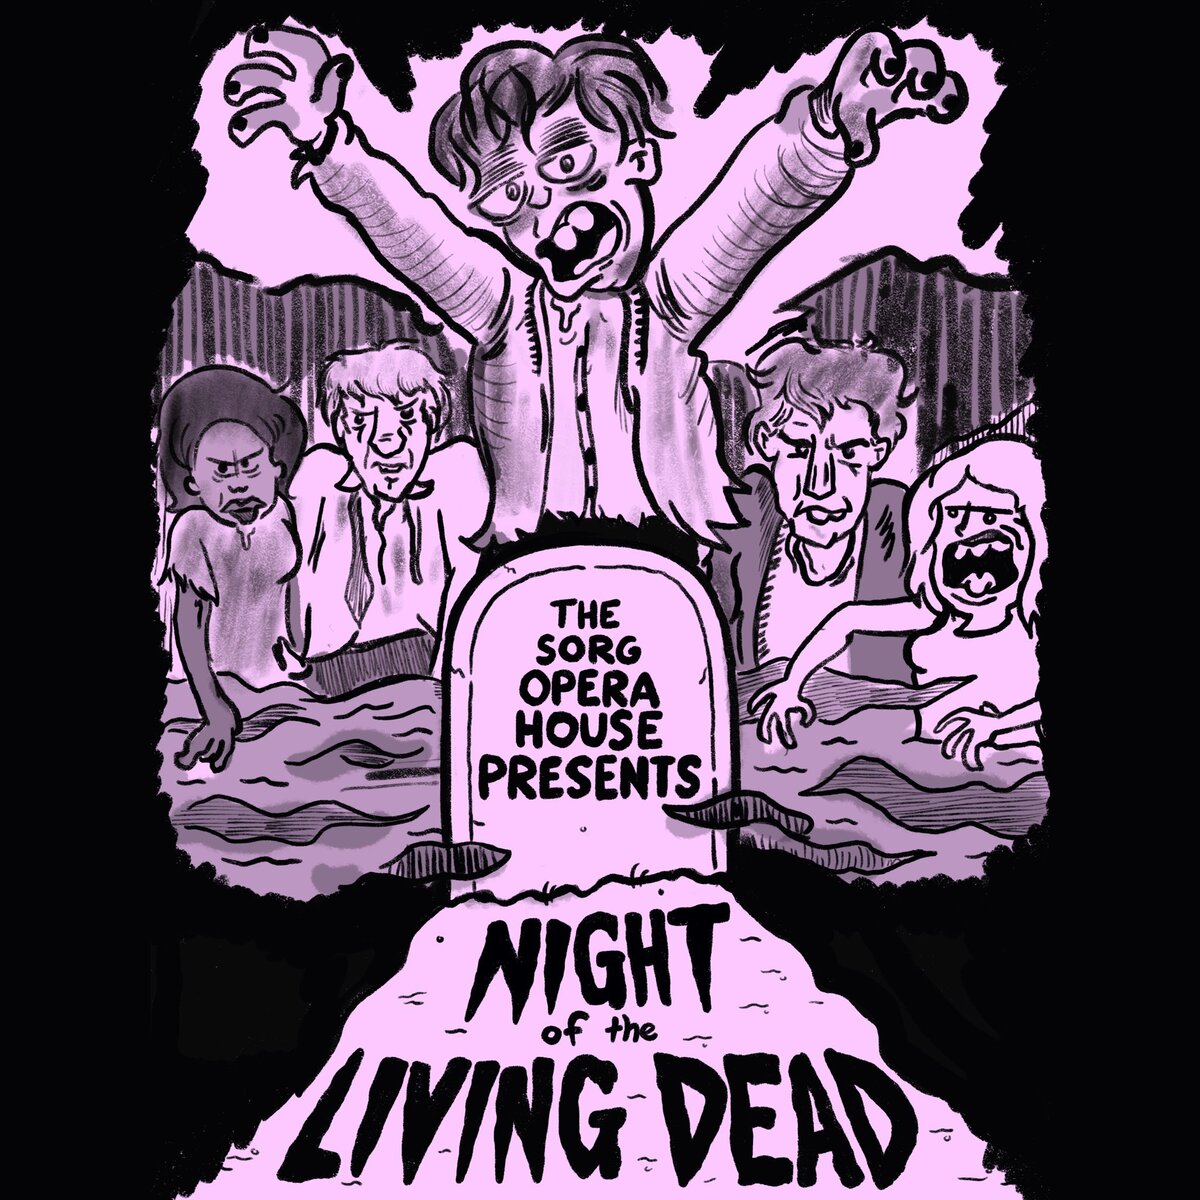 Cartoon drawing of zombies over a gravestone that says "the sorg opera house presents, night of the living dead."